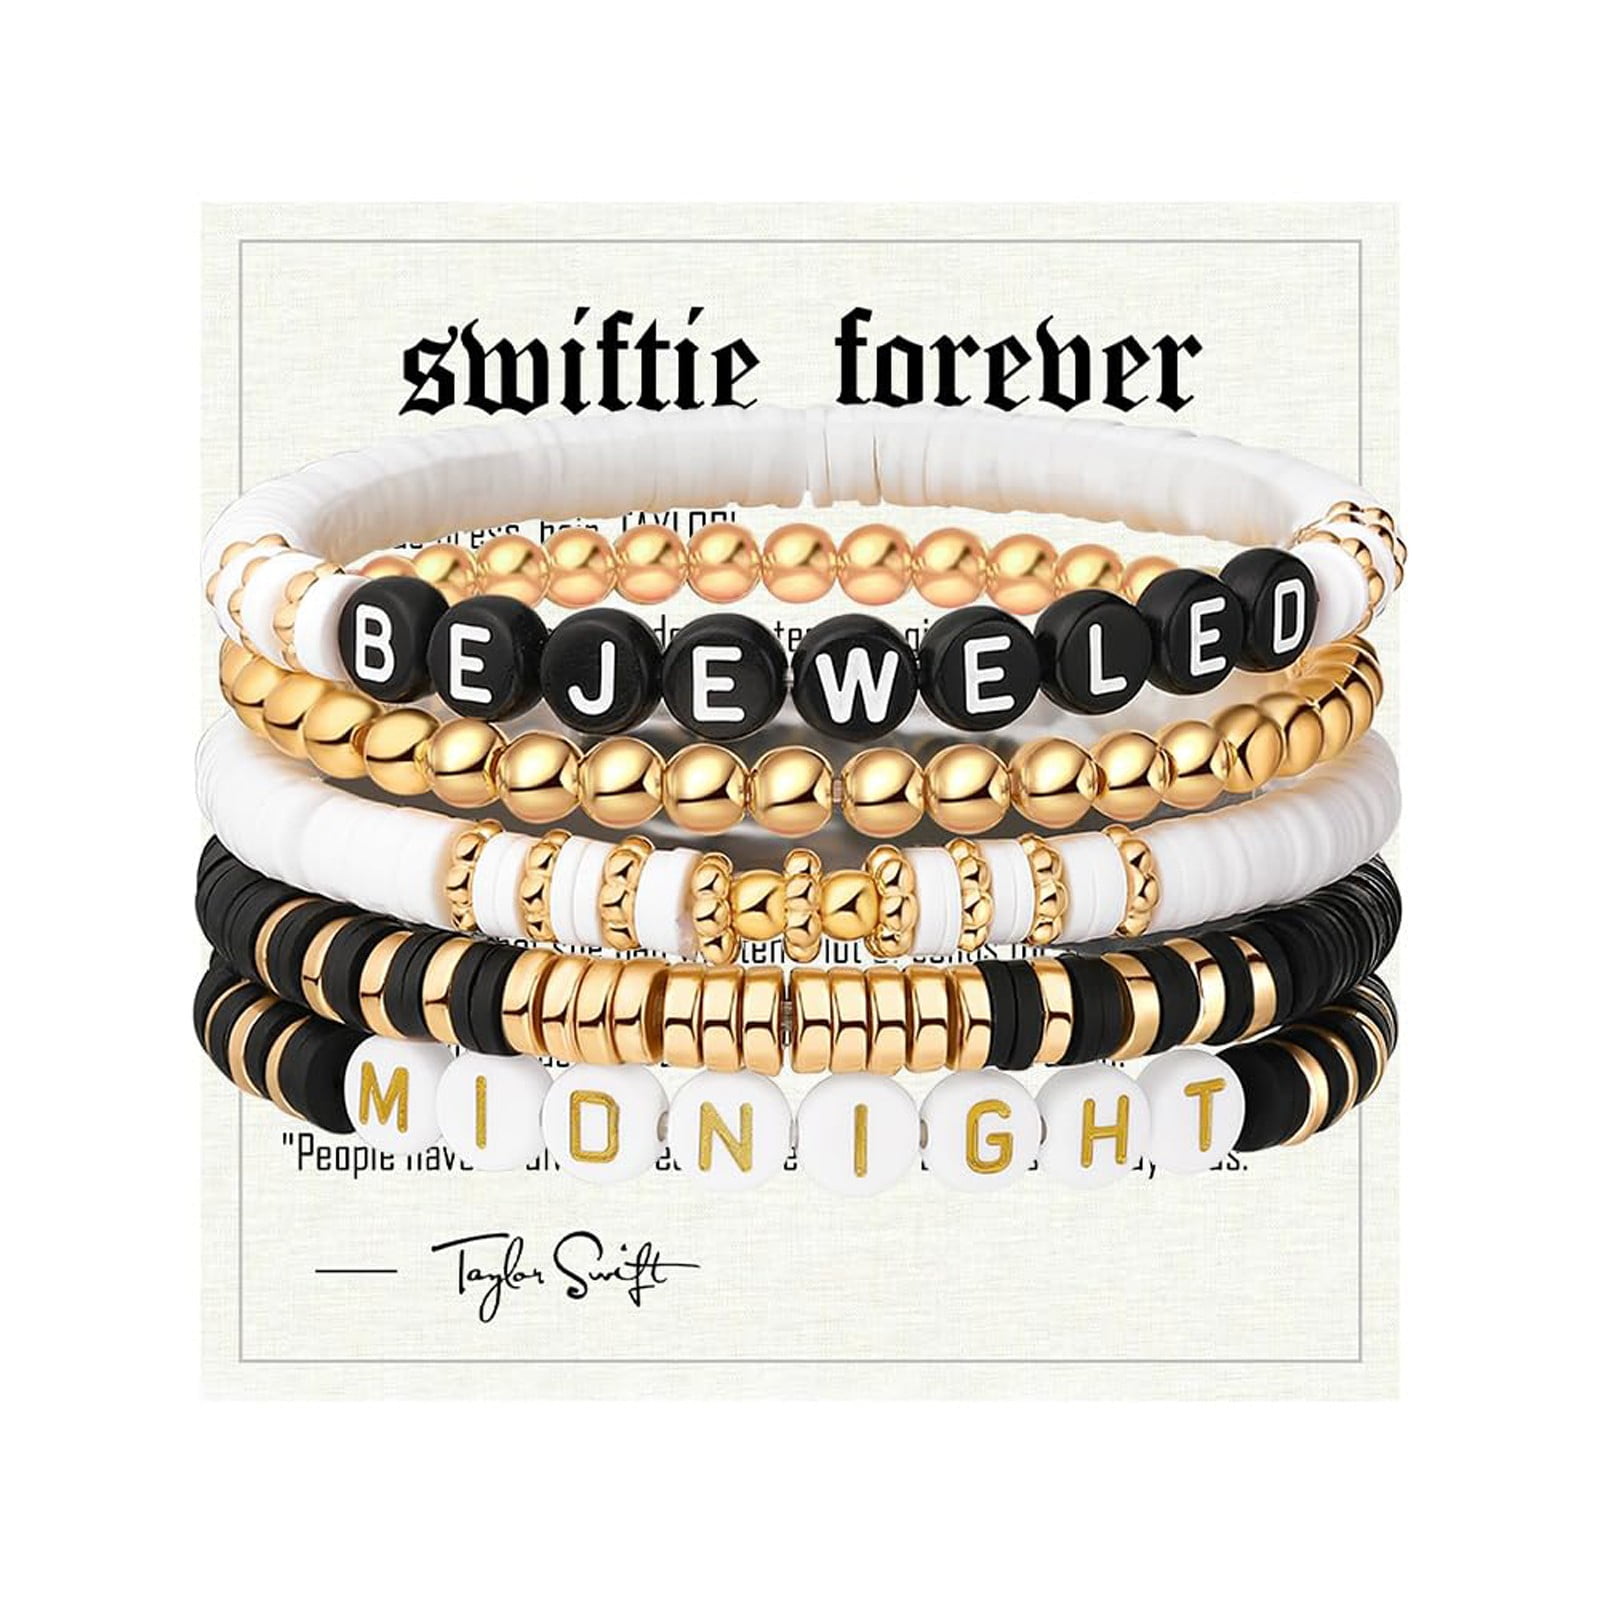 Taylor Swift Merch: Taylor Swift Friendship Bracelets,TS Inspired Bracelets  Set,Taylor Swift Outfit Taylor Merchandise Lover Swiftie Bracelets,  Speaknow Red Evermore ERAS Bracelets,Pack of 12 